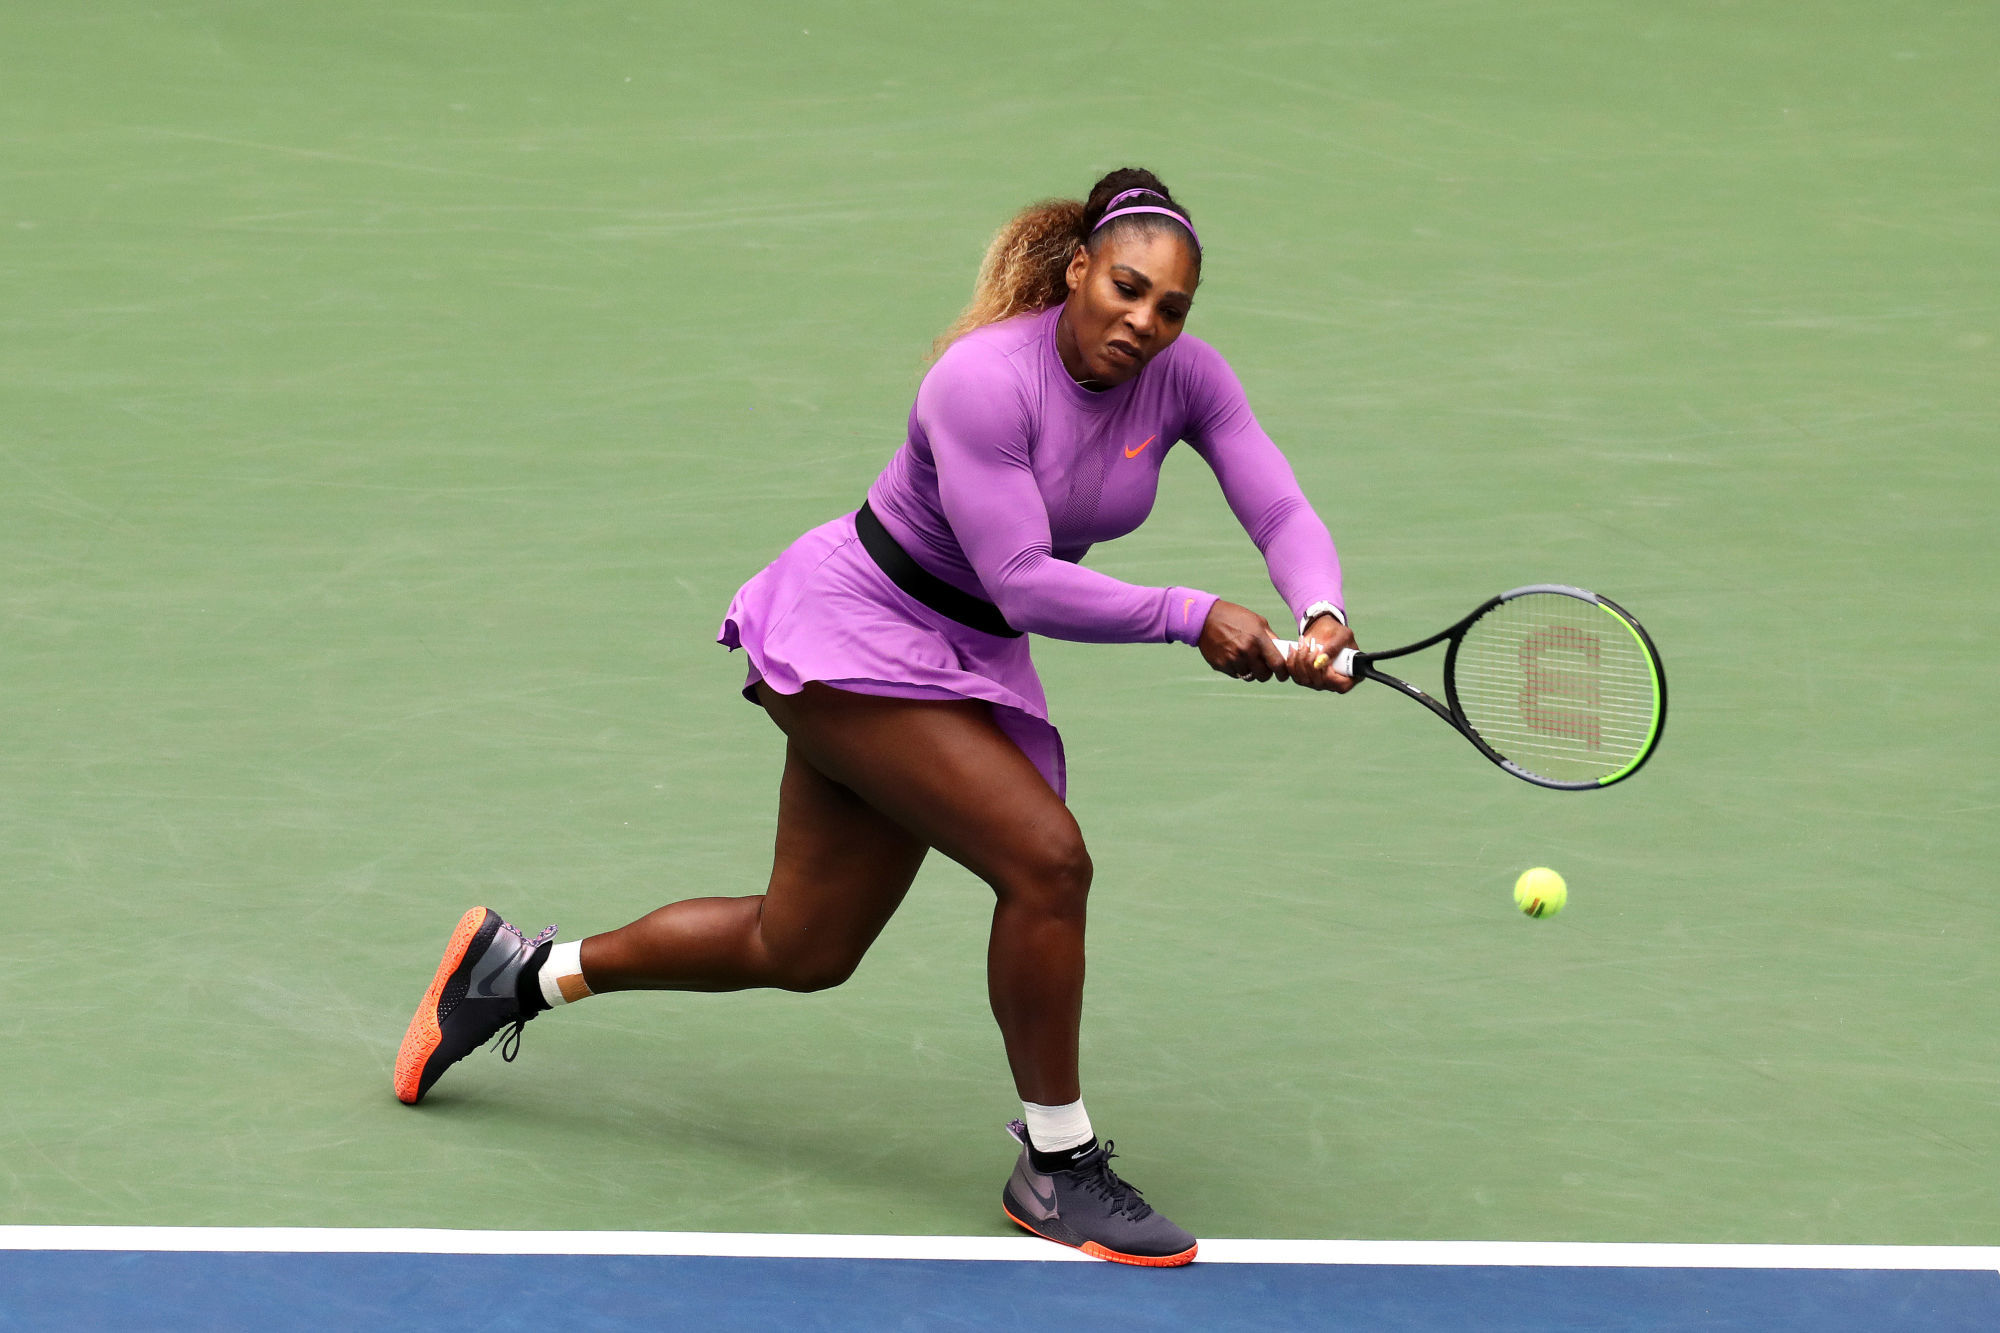 Serena Williams of the United States during the Women's Final US Open on September 7, 2019 in New York City. (Photo by Marek Janikowski/Icon Sport) - Serena WILLIAMS